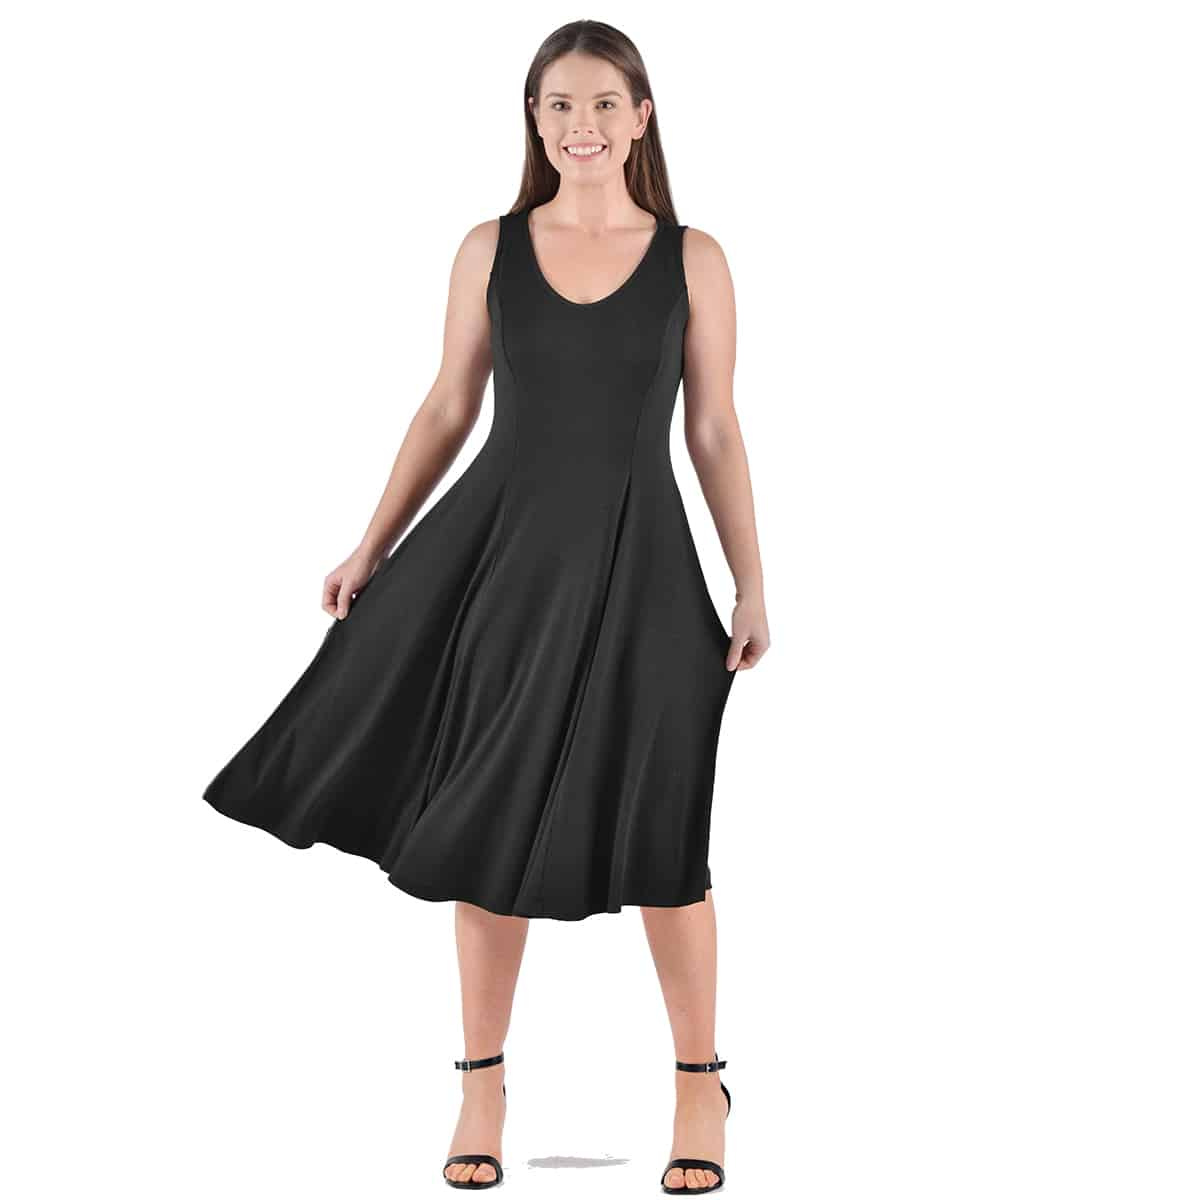 The princess bodice and flowing skirt make this dress flattering for any figure. Did I mention that it is made from luxuriously soft bamboo fabric? Available in S-XXL.
eco-essentials.com/product/women-… #bamboofabric #ecofashion #bambooclothing #efforts #ecoessentials